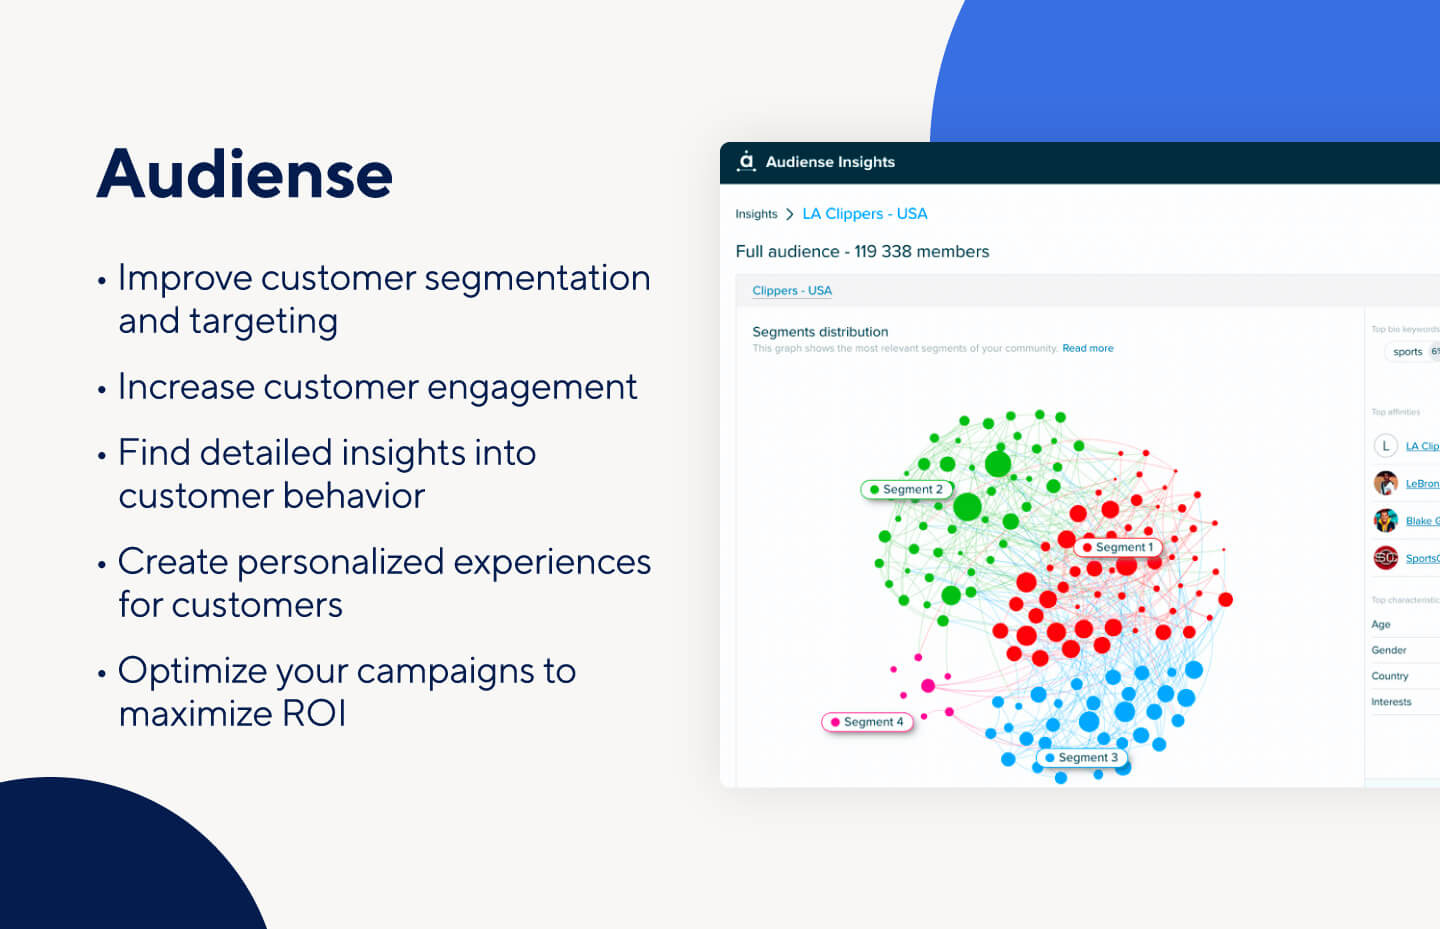 Use a digital marketing tool like Audiense to learn about your target audiences.